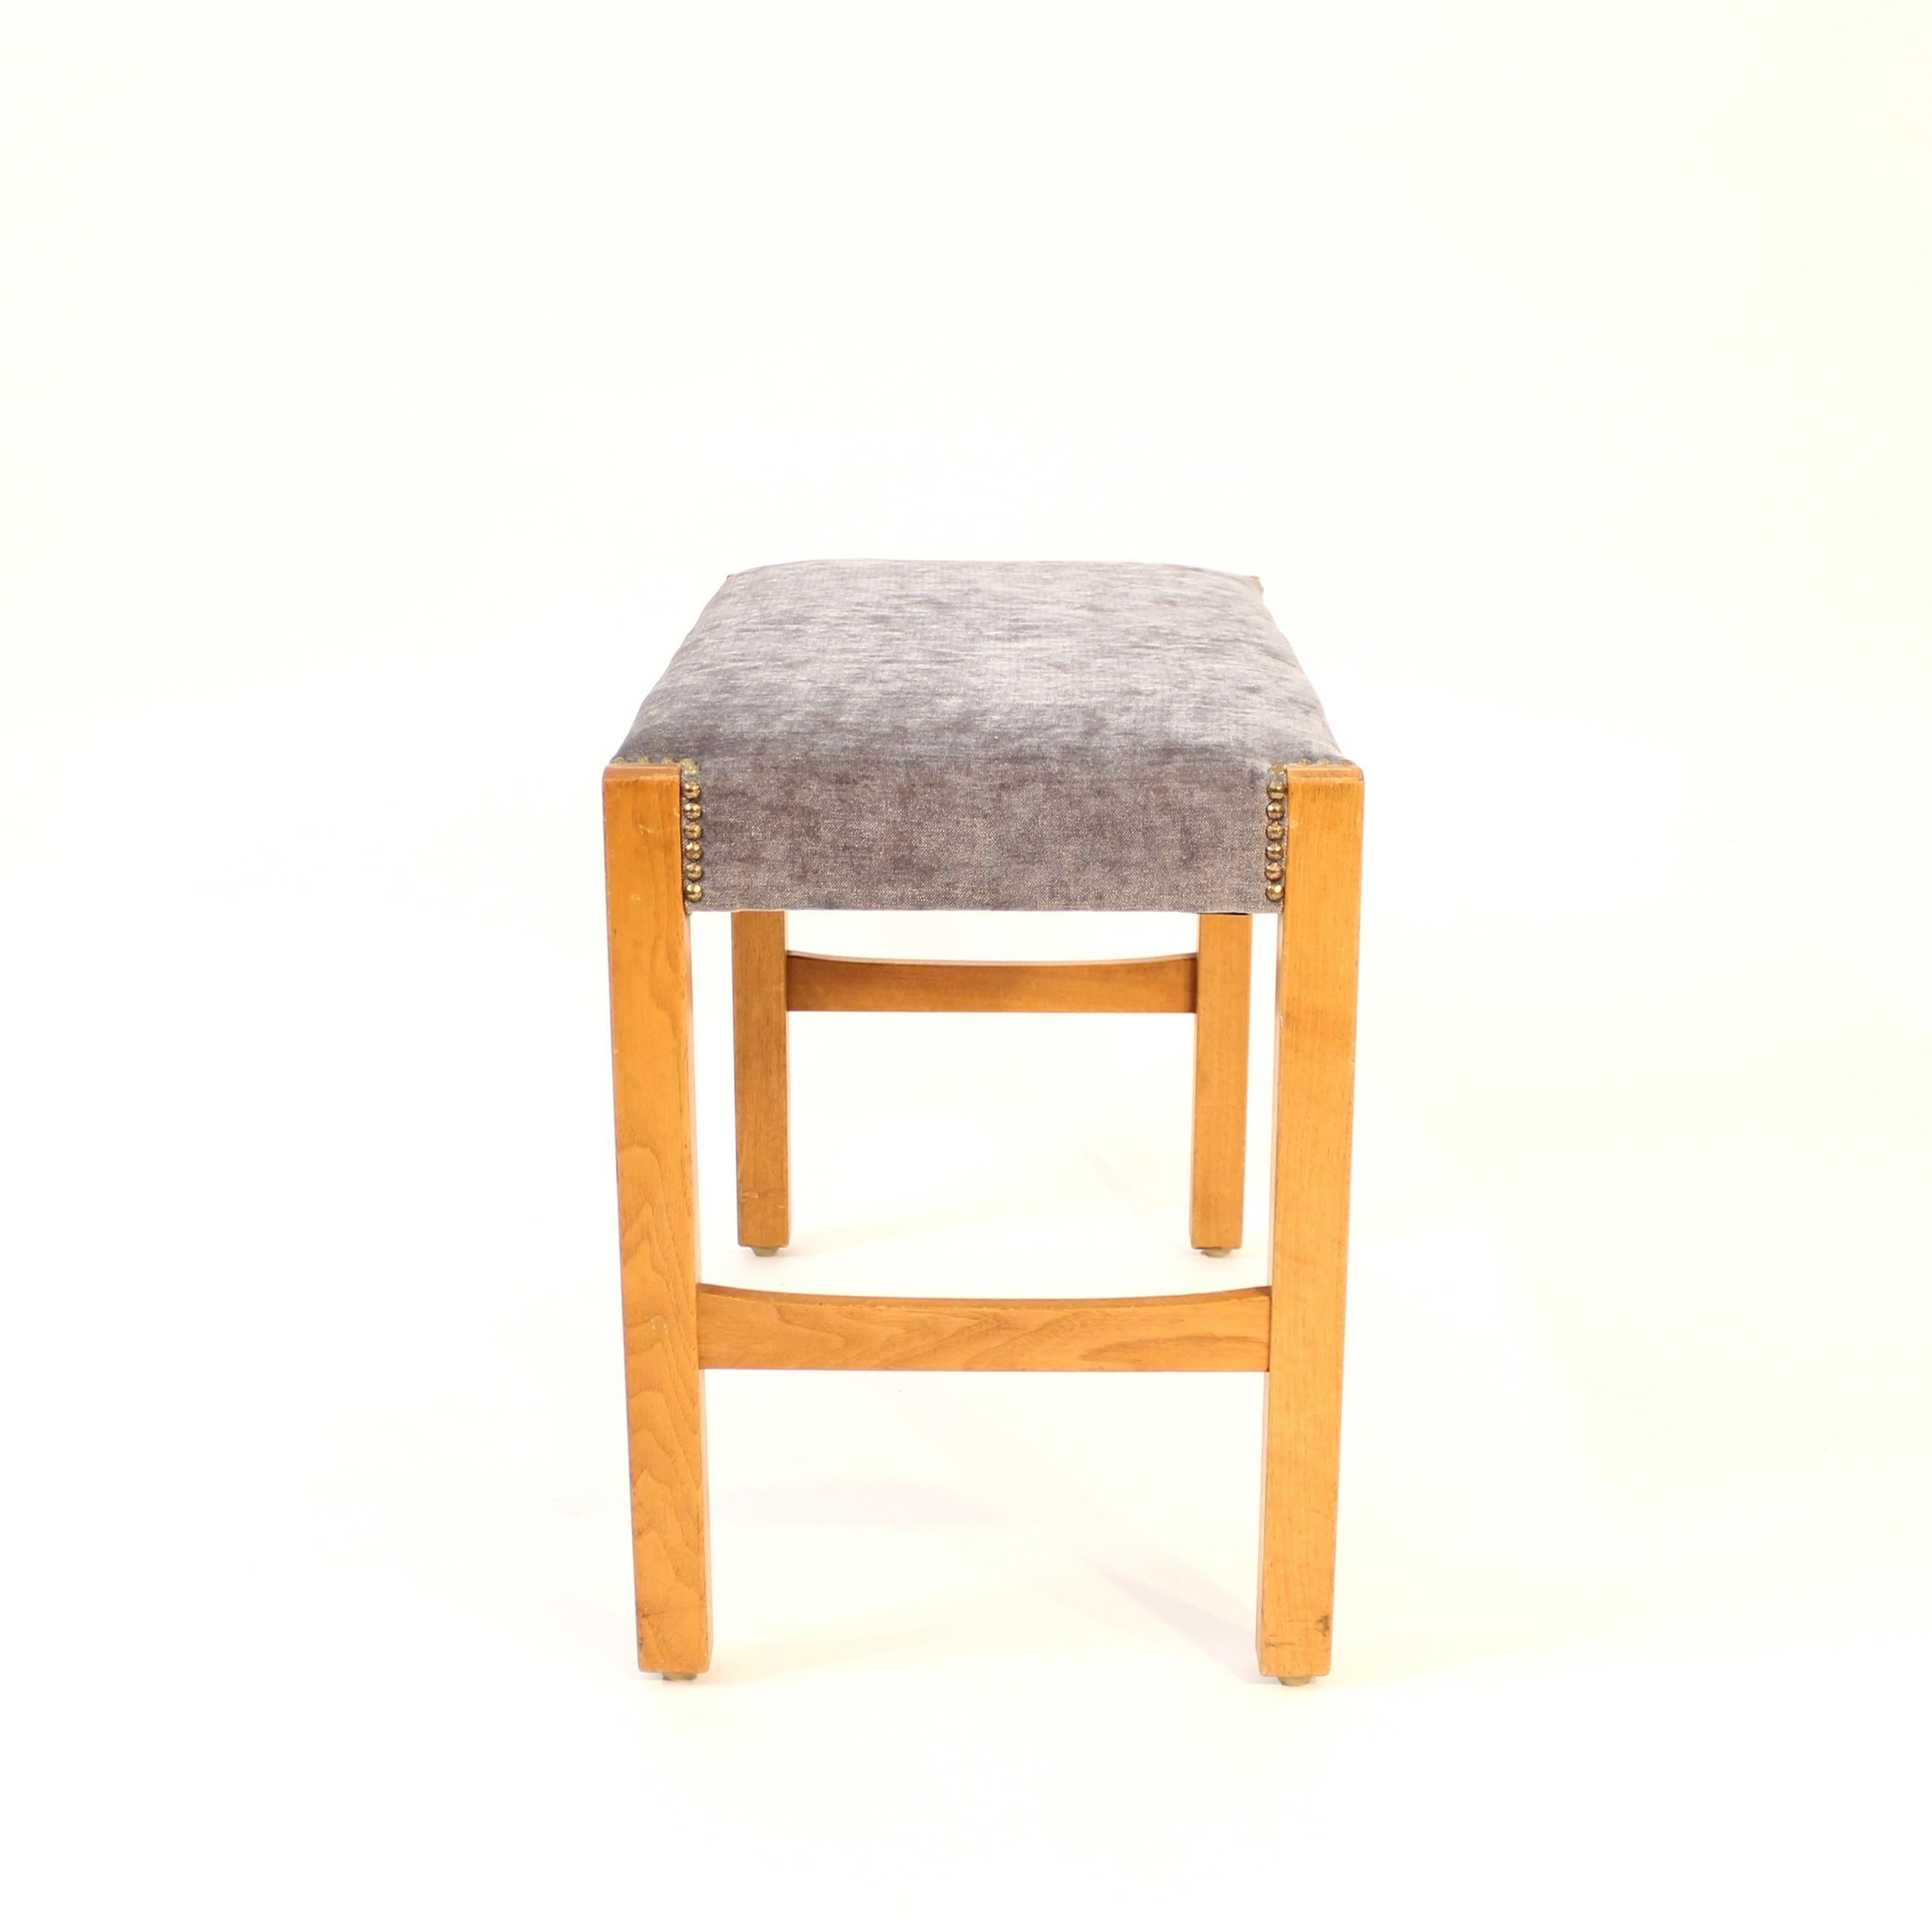 20th Century Scandinavian mid-century stool / piano stool in the style of Josef Frank, 1950s For Sale